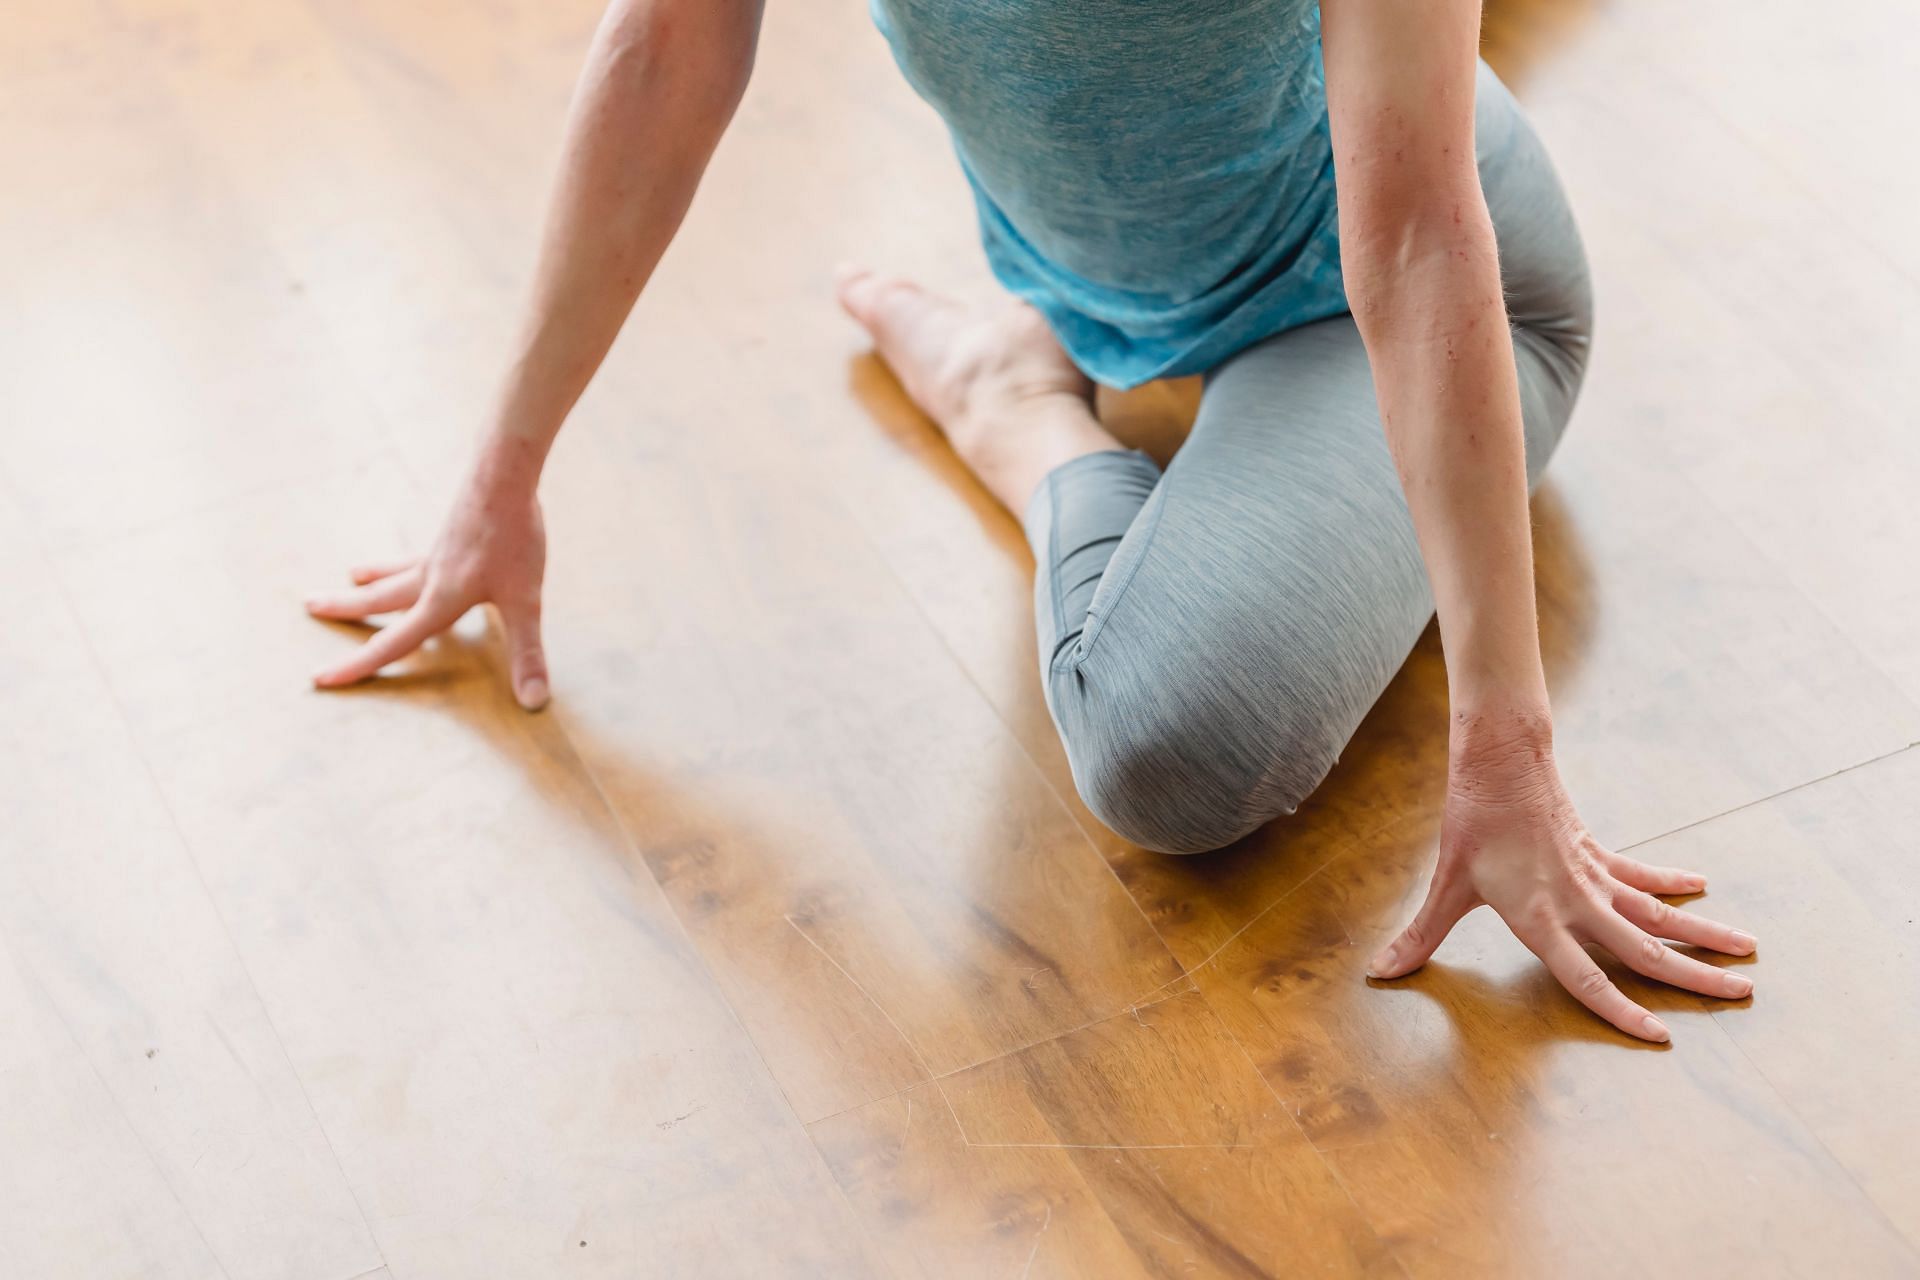 Pigeon pose is a great glute stretch for the hips. (Photo via Pexels/Marta Wave)